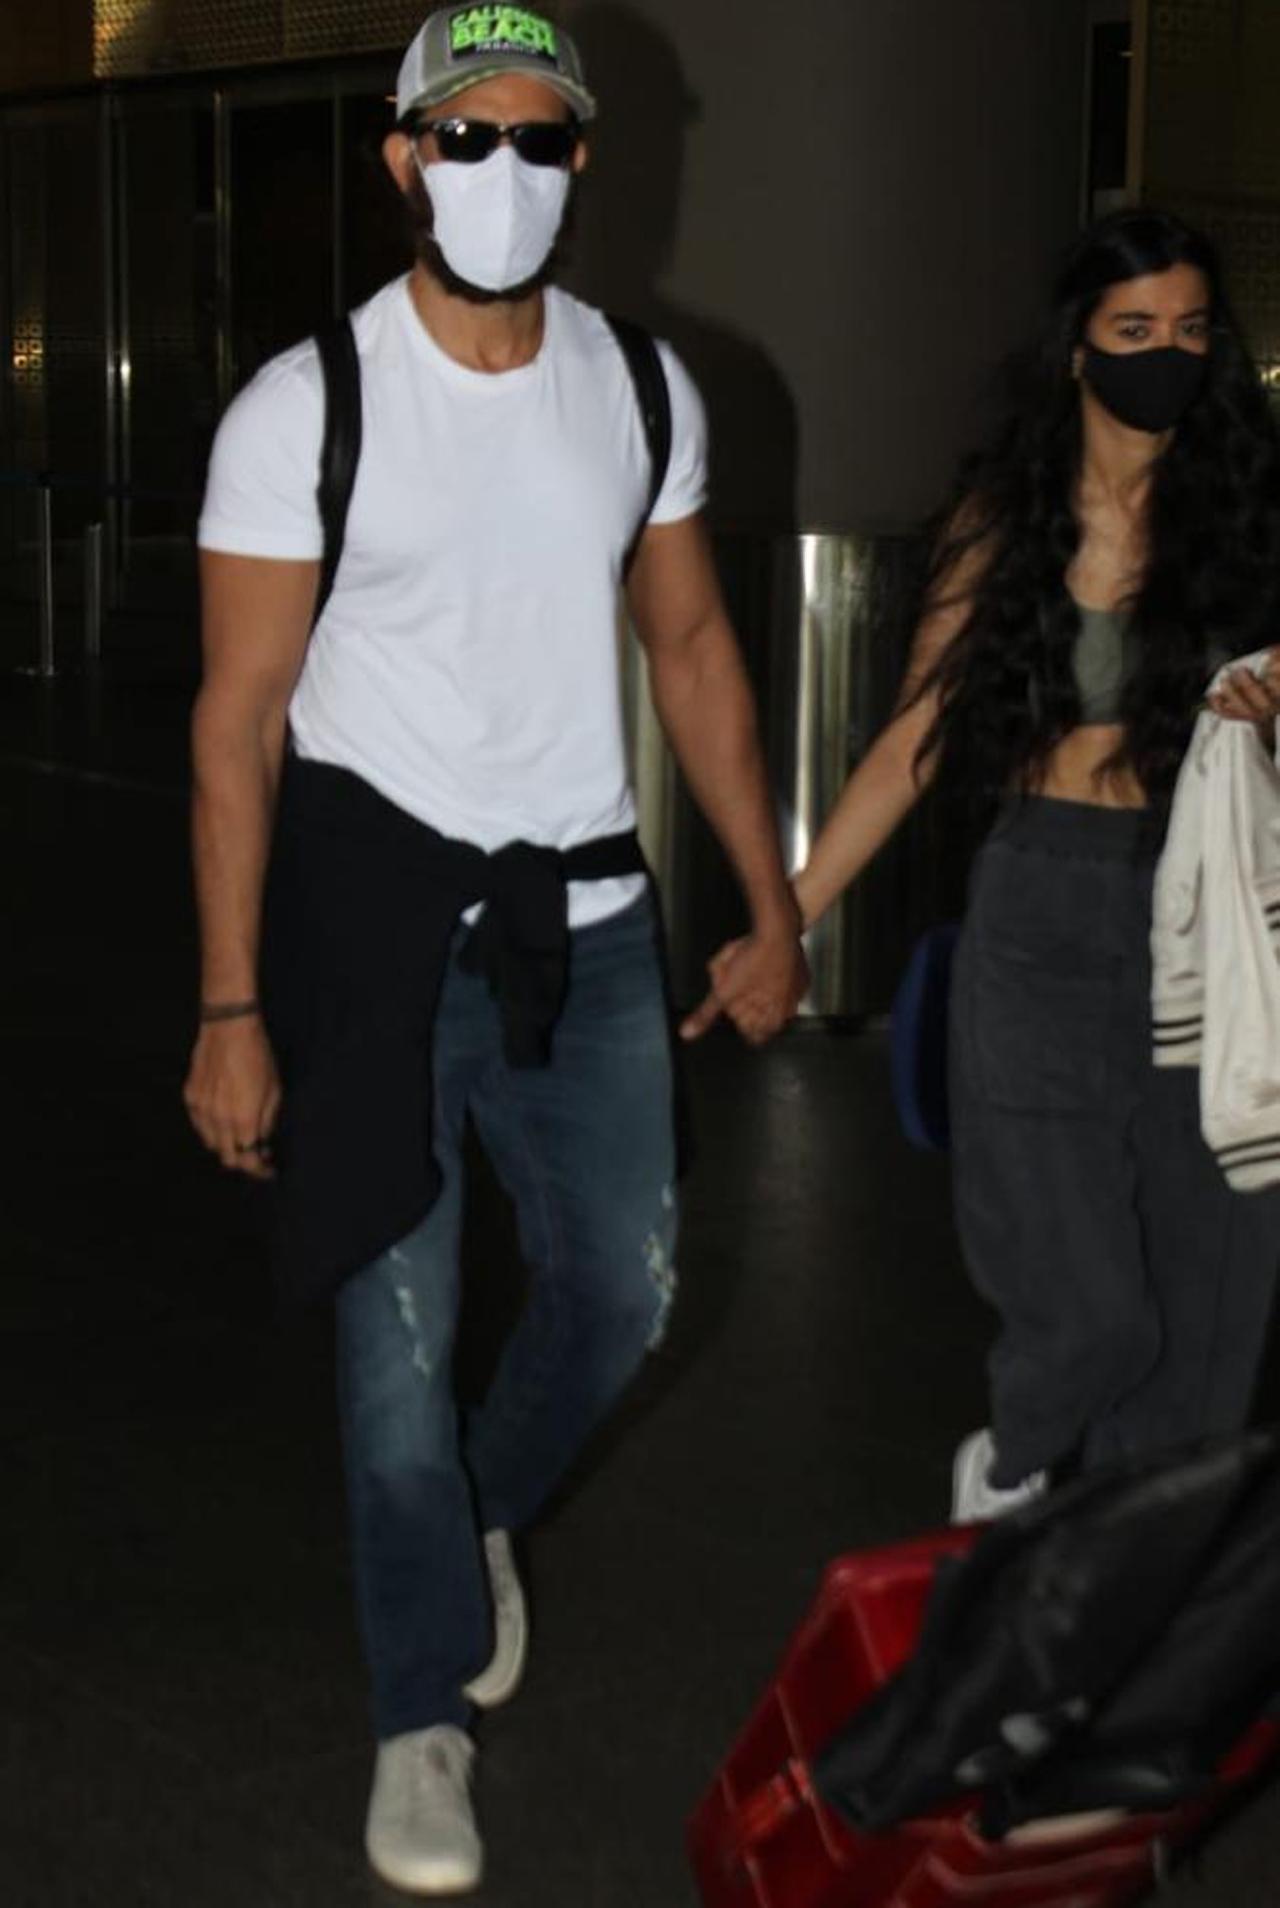 Hrithik Roshan and Saba Azad were clicked walking hand-in-hand as they arrived together at the Mumbai airport. The rumours of their relationship have been doing the rounds for quite some time now. 